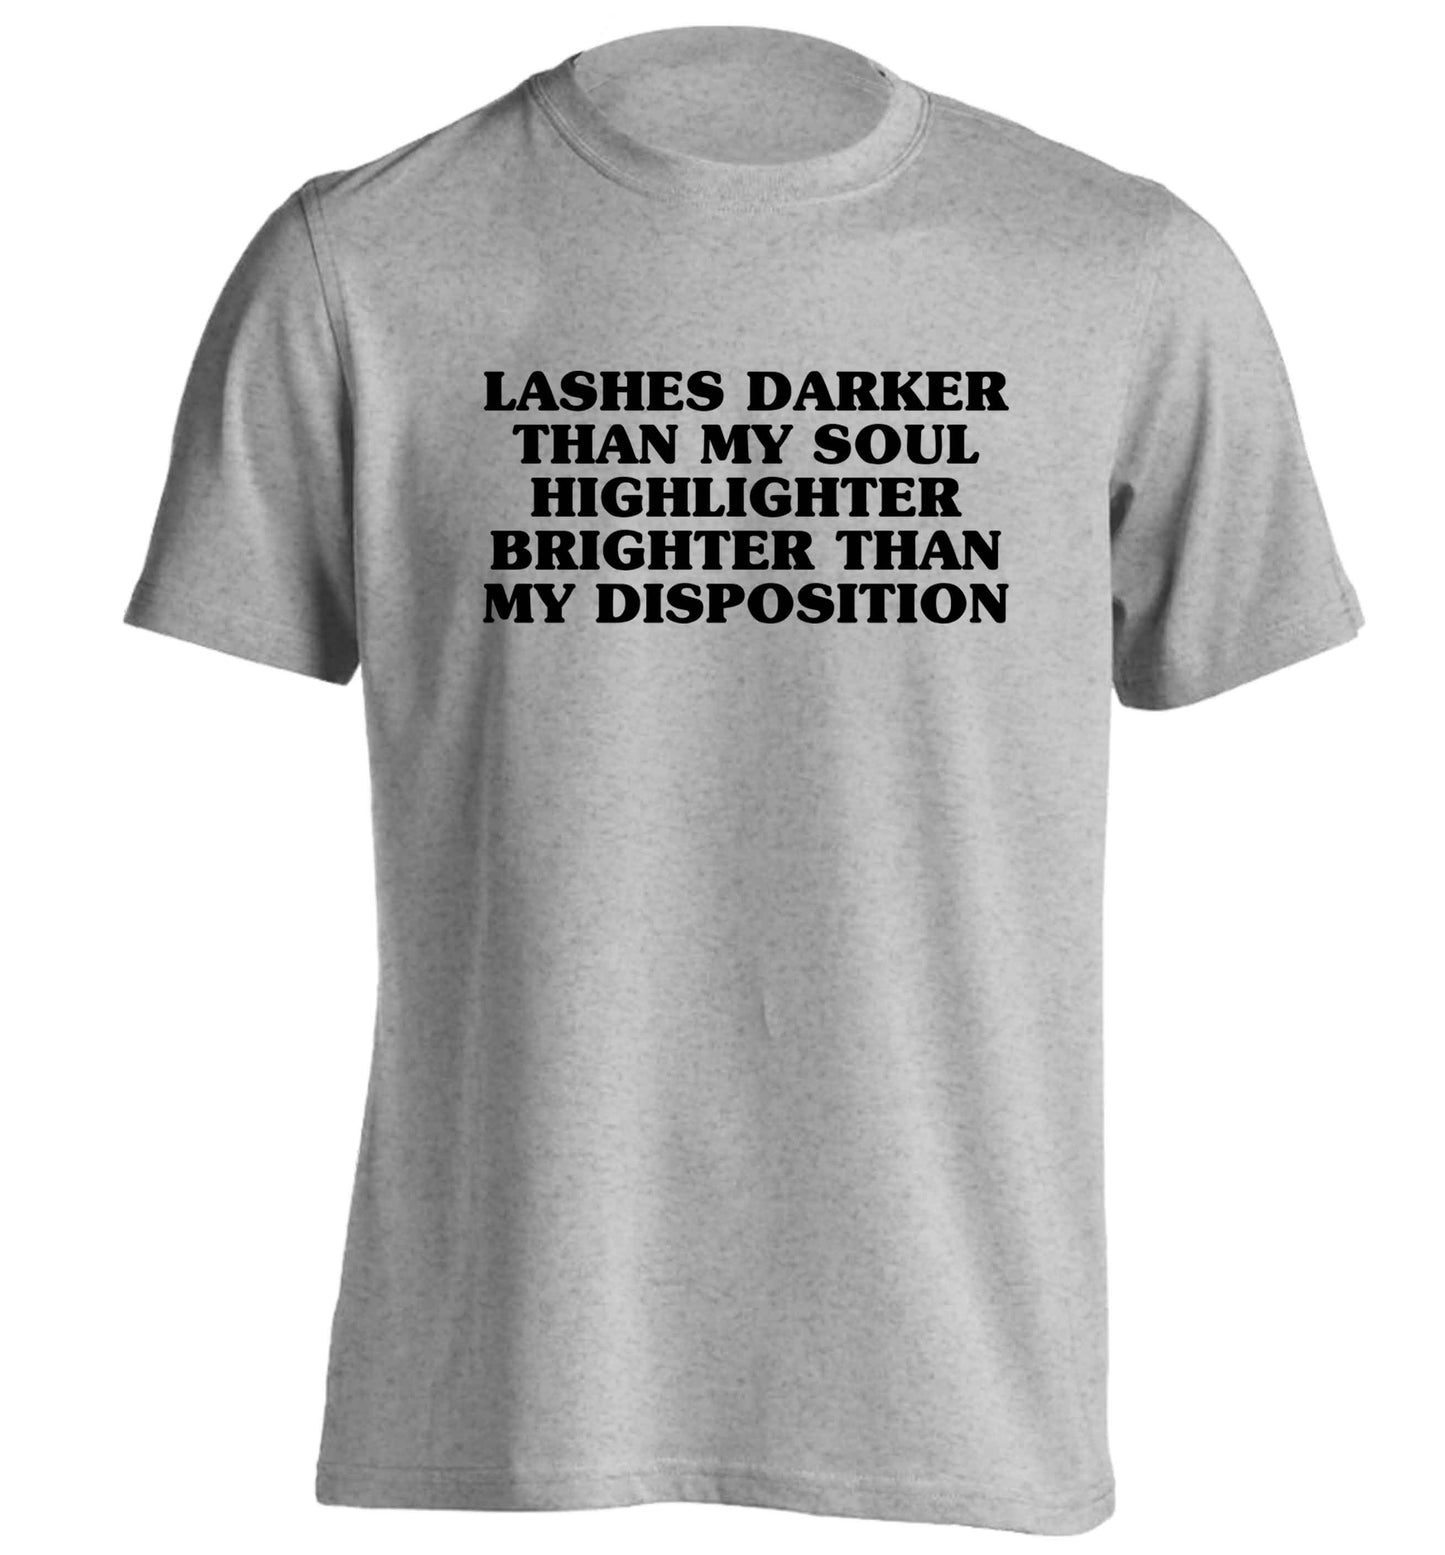 Lashes darker than my soul, highlighter brighter than my disposition adults unisex grey Tshirt 2XL